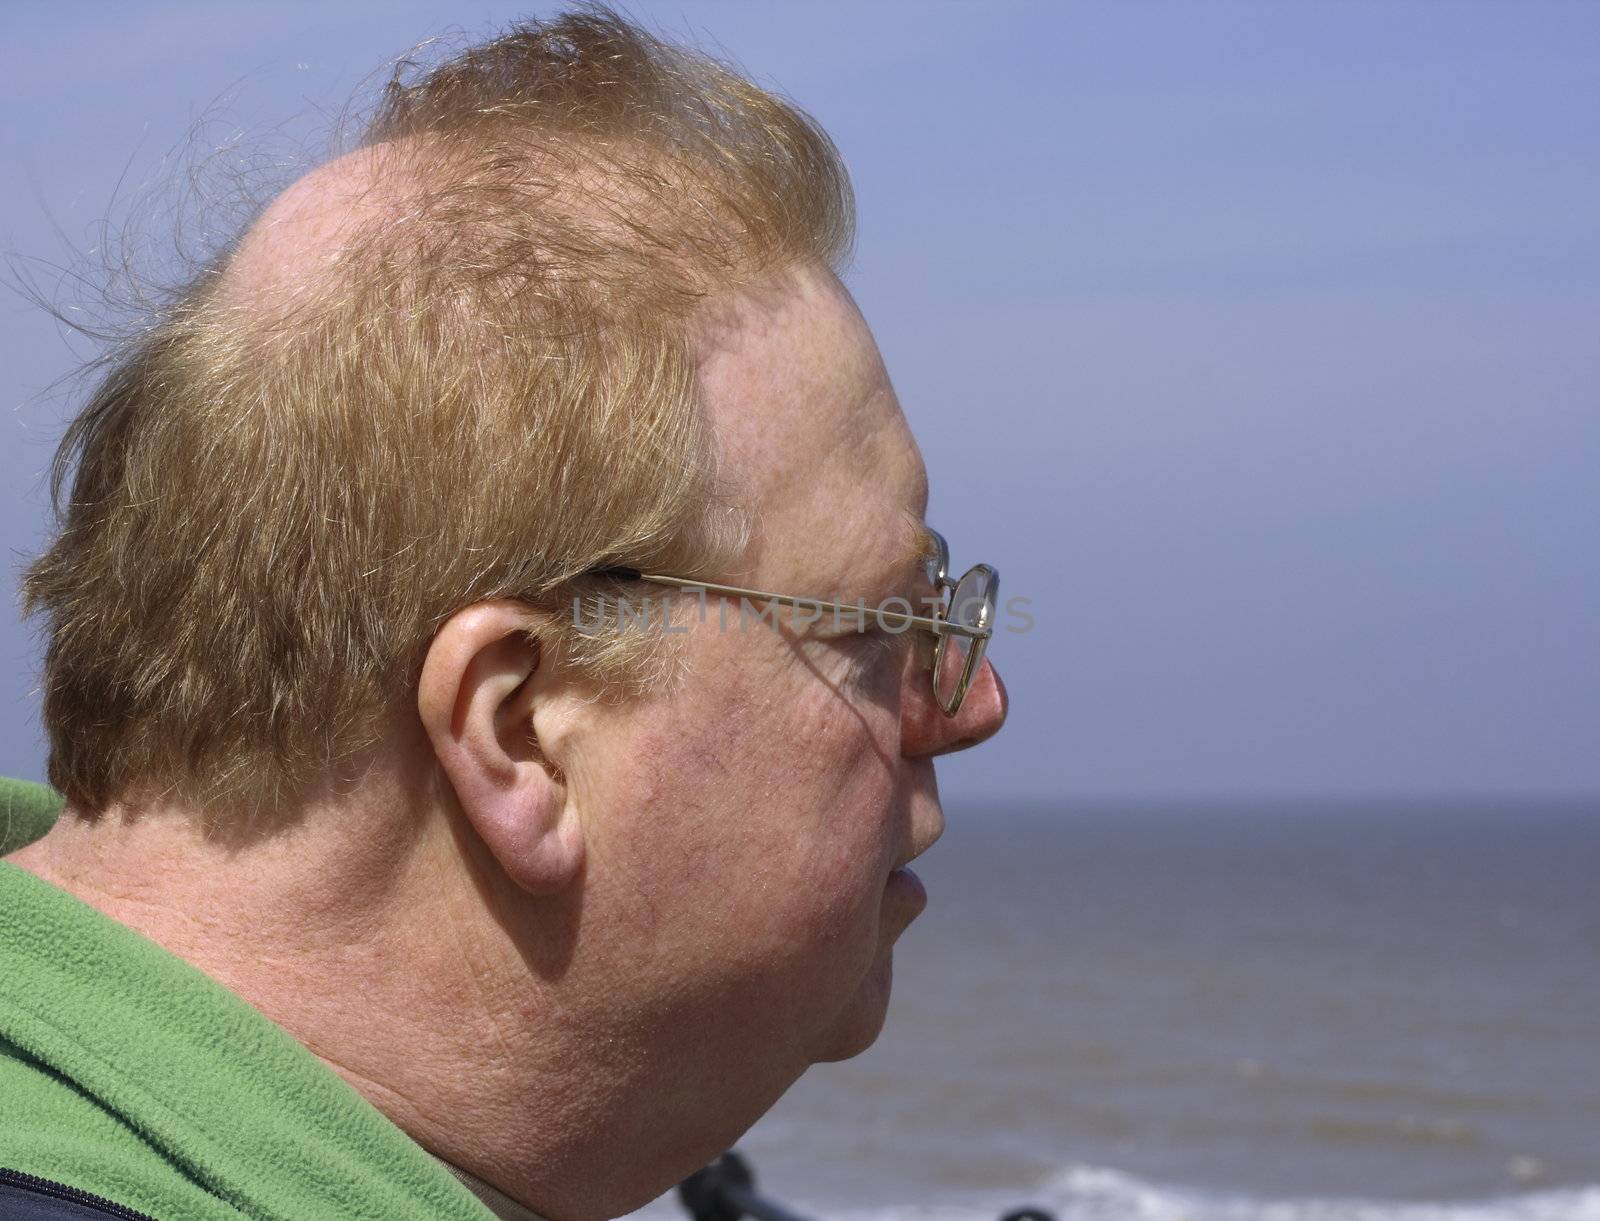 middle aged male with redhair and glasses looking out to sea